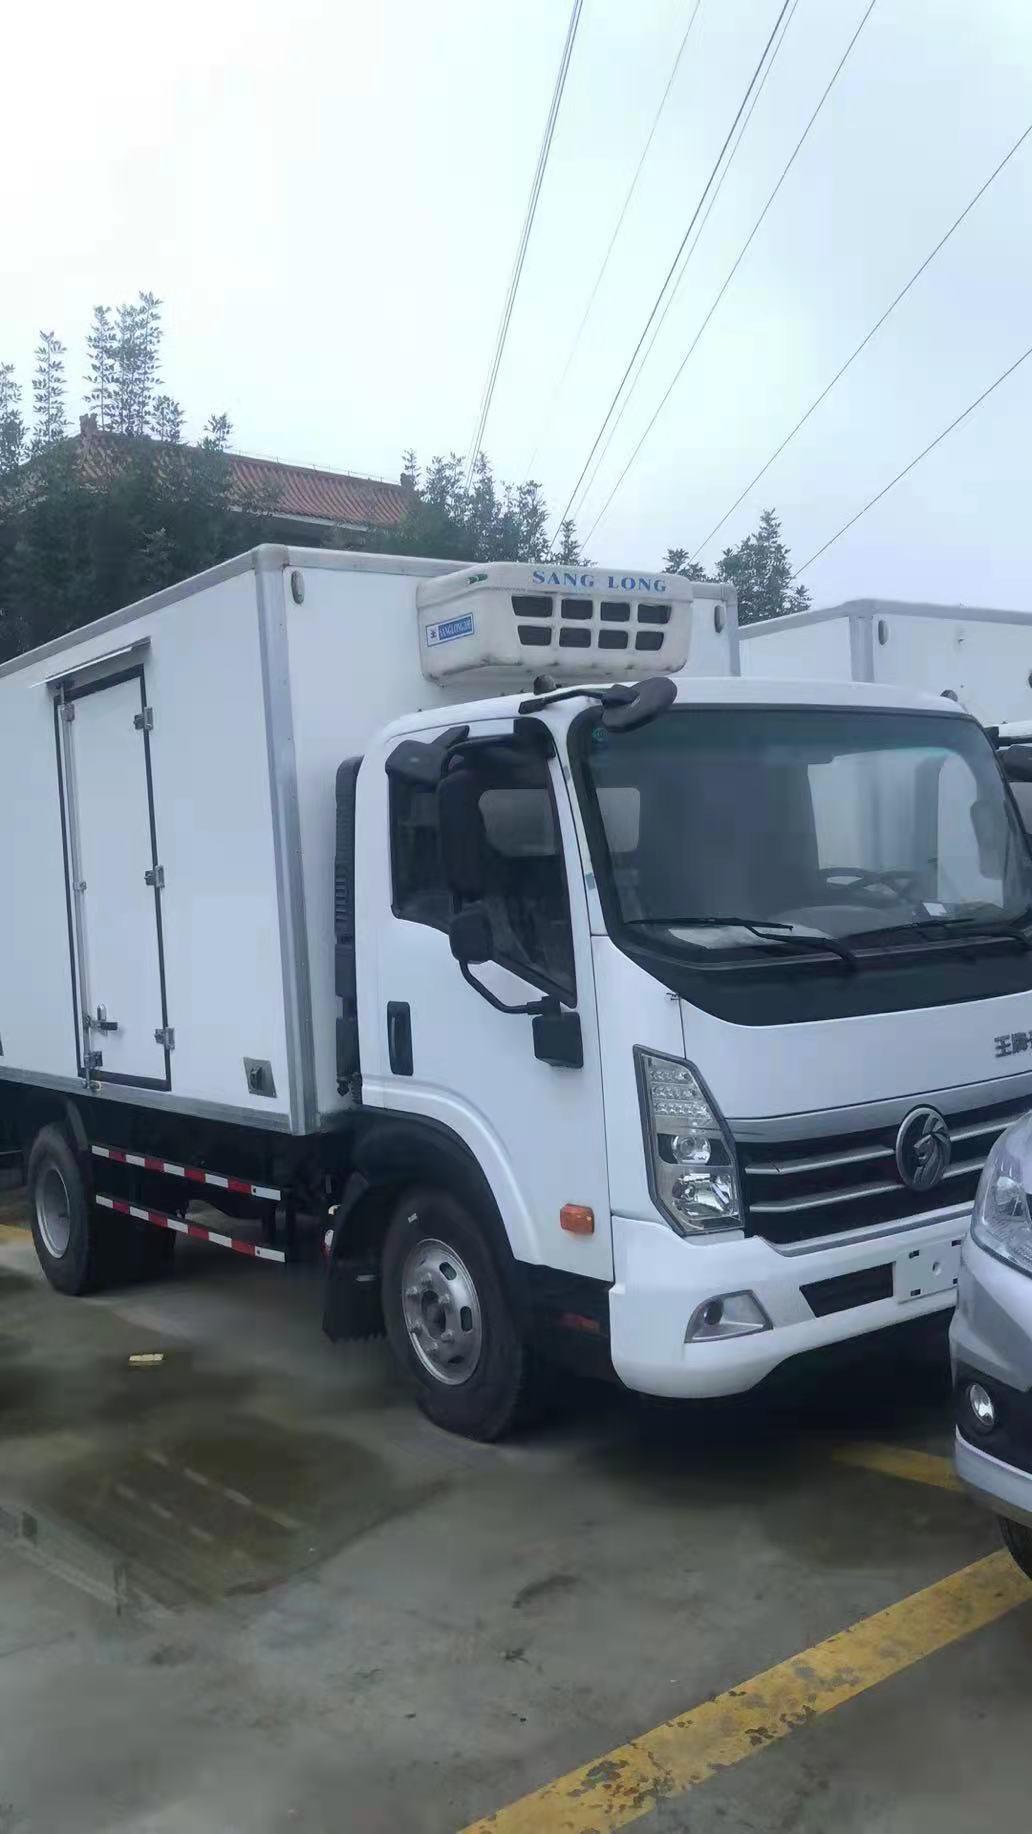 Freezer Refrigerated Cold Room Frozen Chicken/Fish/Meat/Ice Cream/Vegetables Transport Van Freezing Refrigeration Truck for Sale